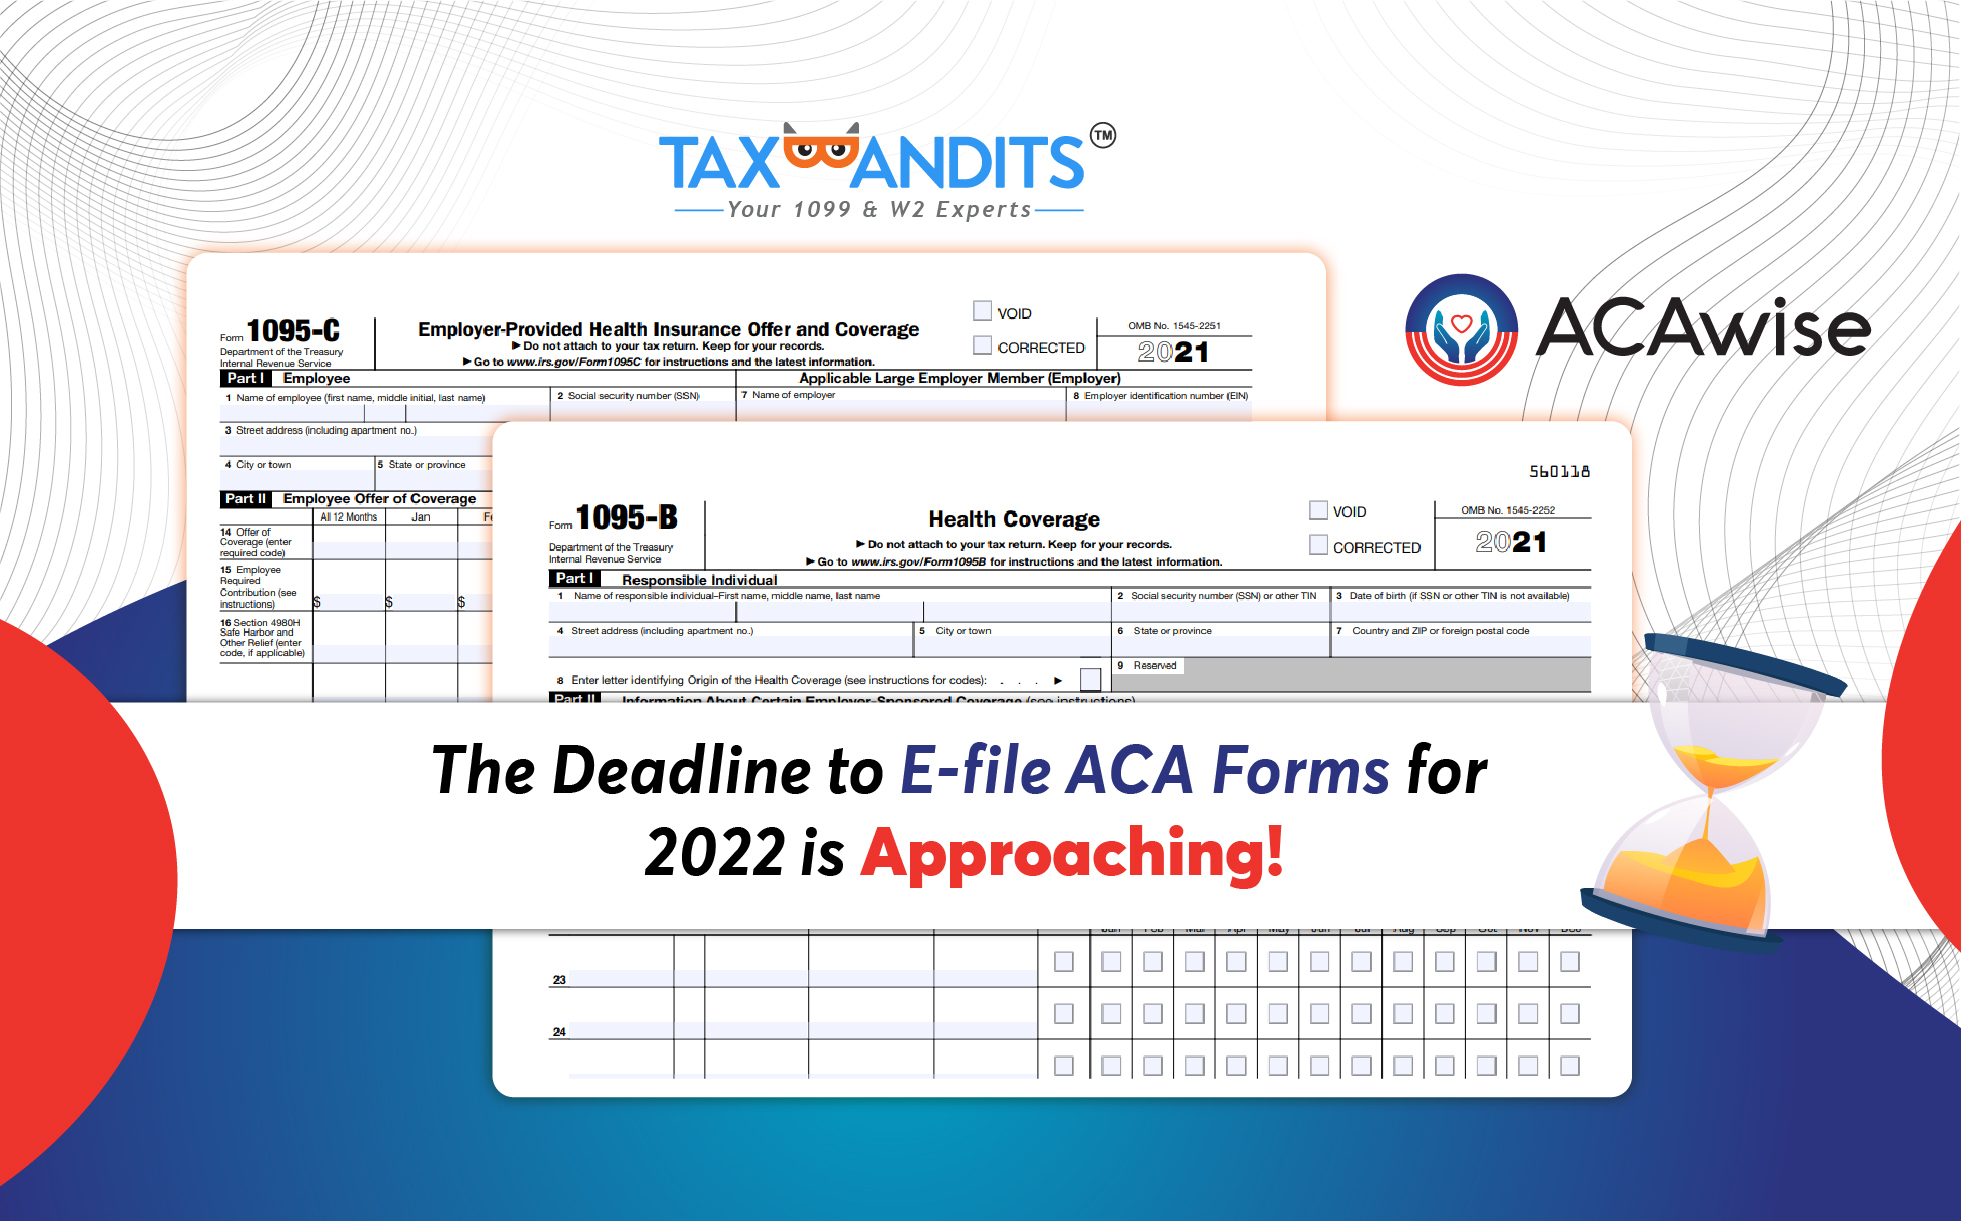 The Deadline to Efile ACA Forms for 2022 is Approaching! Blog